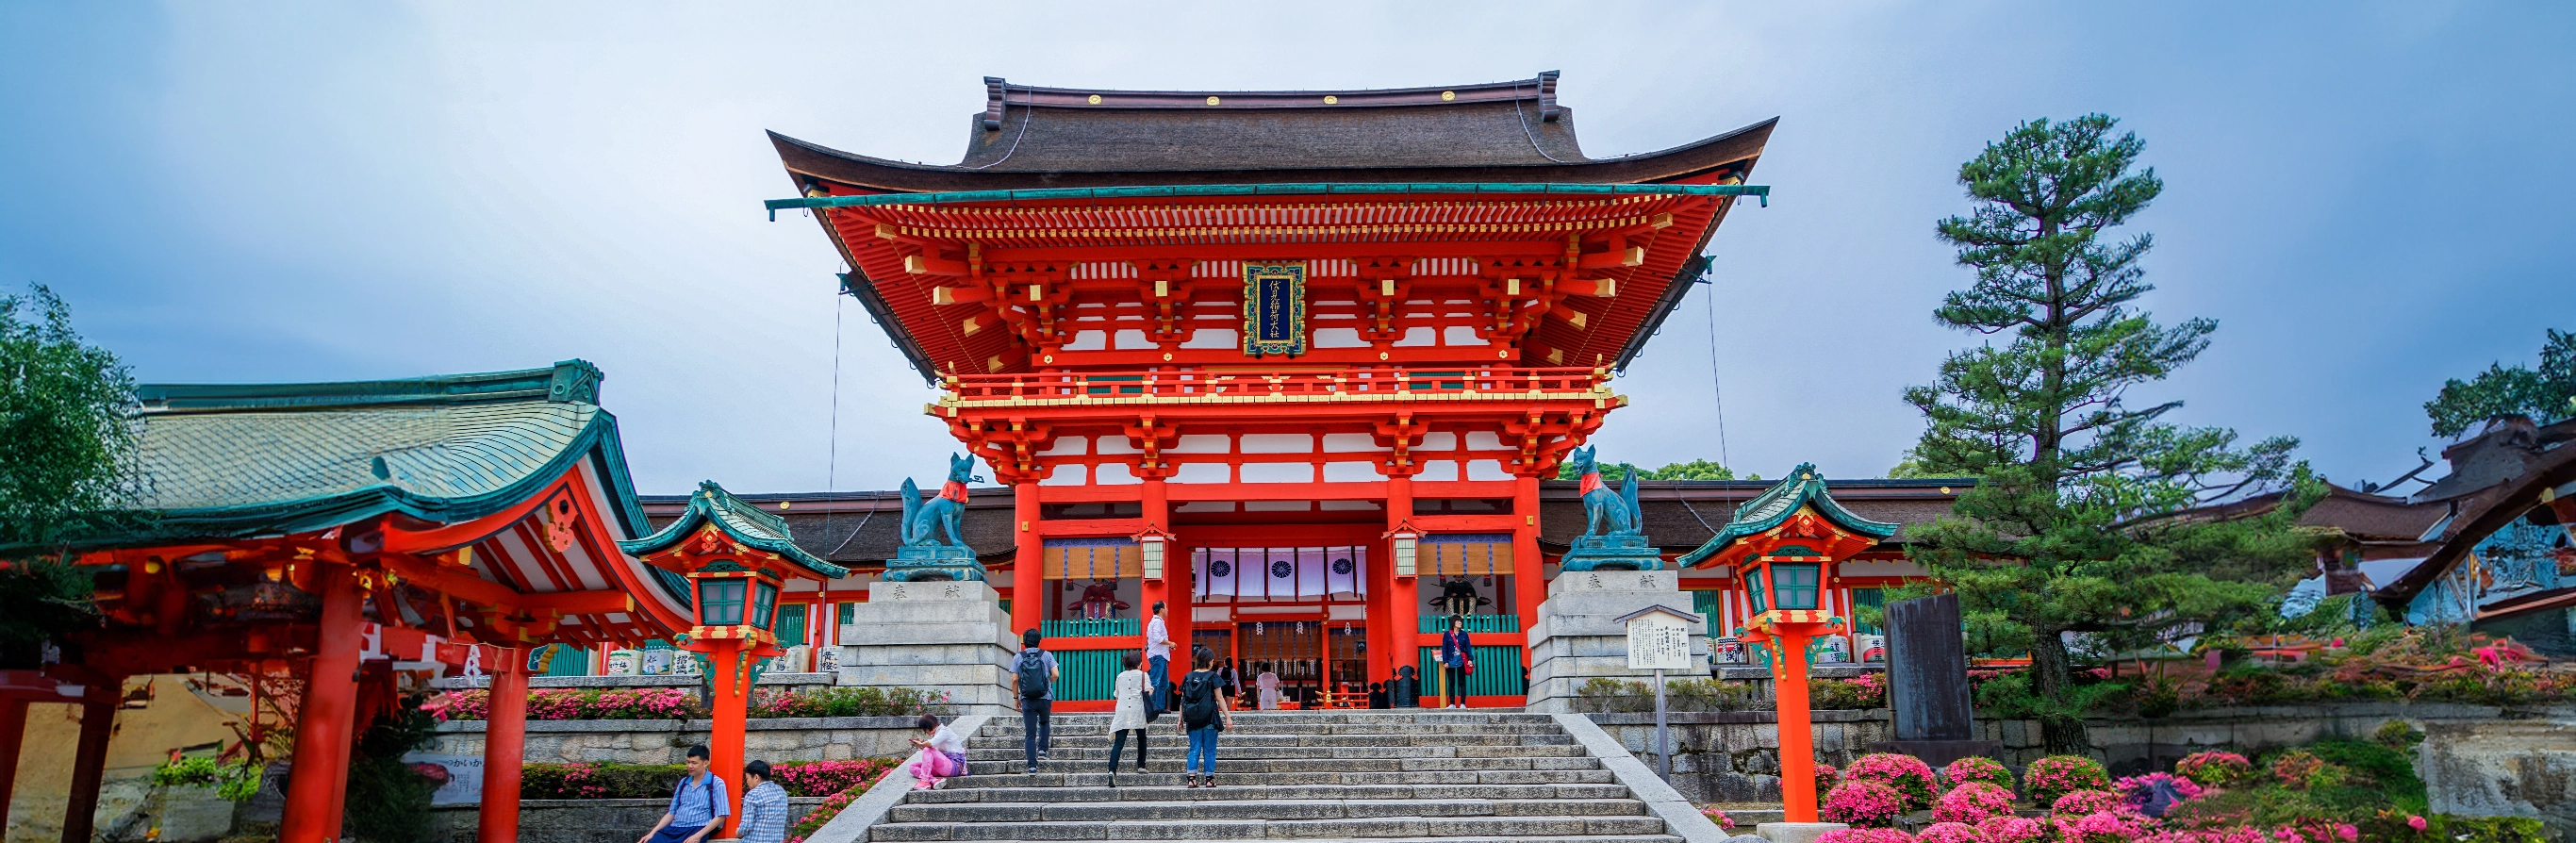 Panoramic view of a vibrant red Japanese temple gate with steps leading up to it, flanked by lush greenery under a cloudy sky, with visitors approaching the entrance.